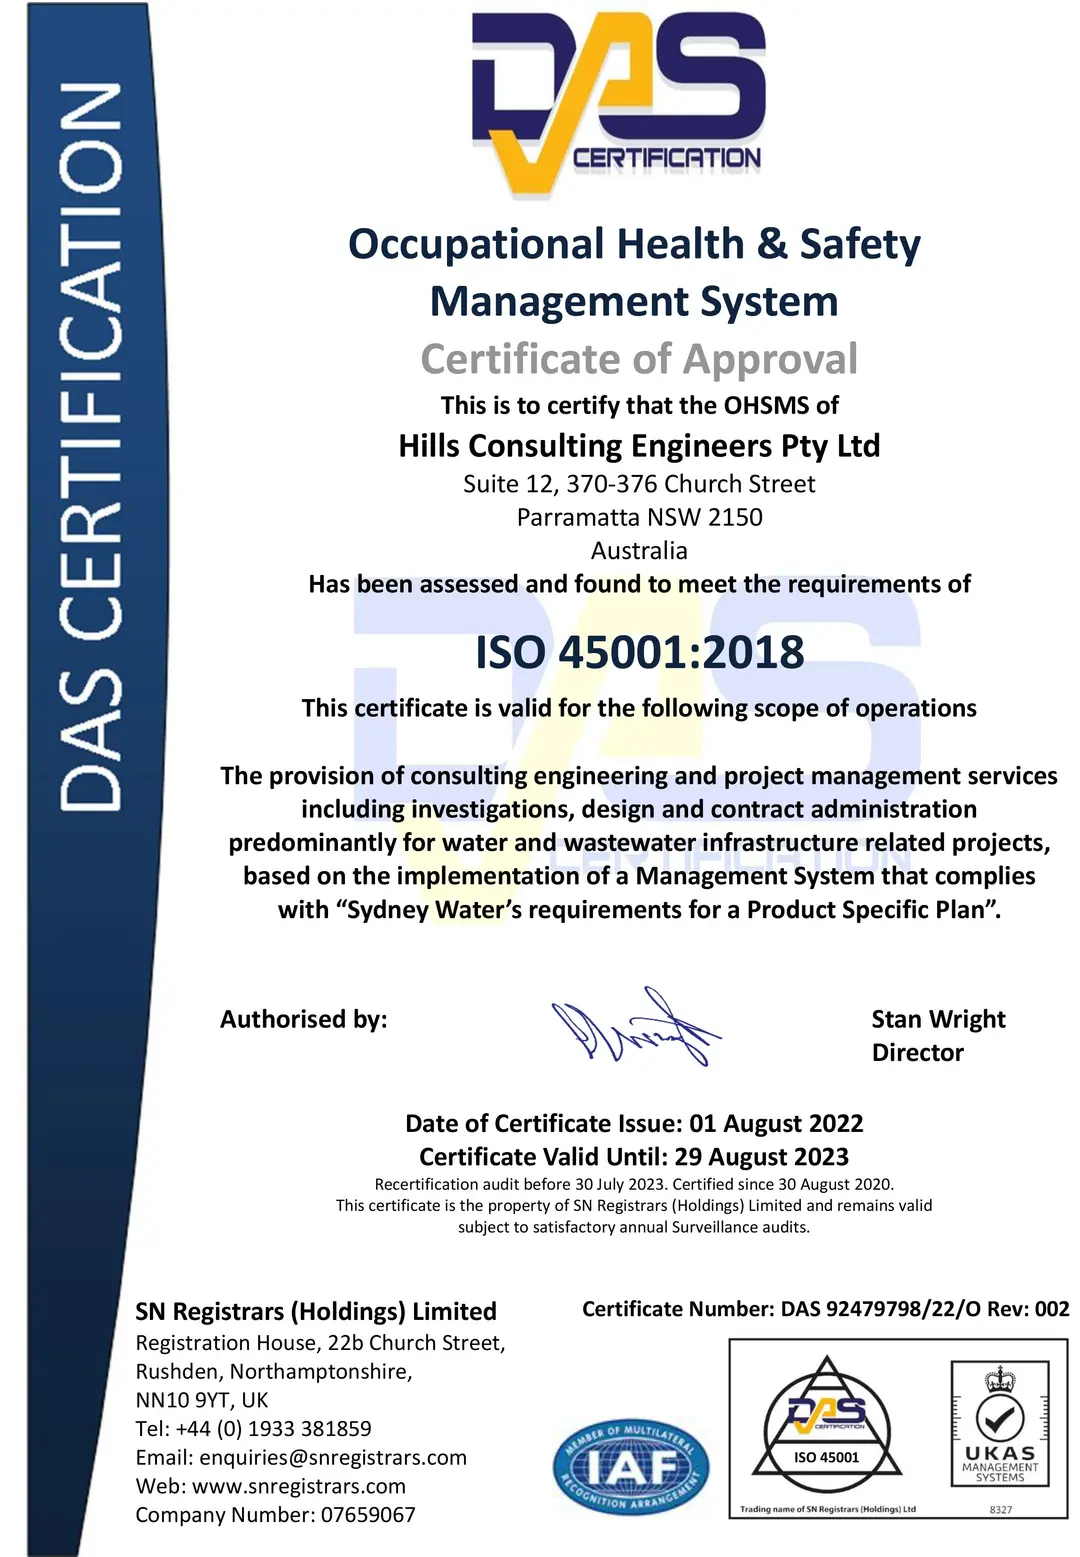 DAS ISO Certificate - Occupational Health Safety